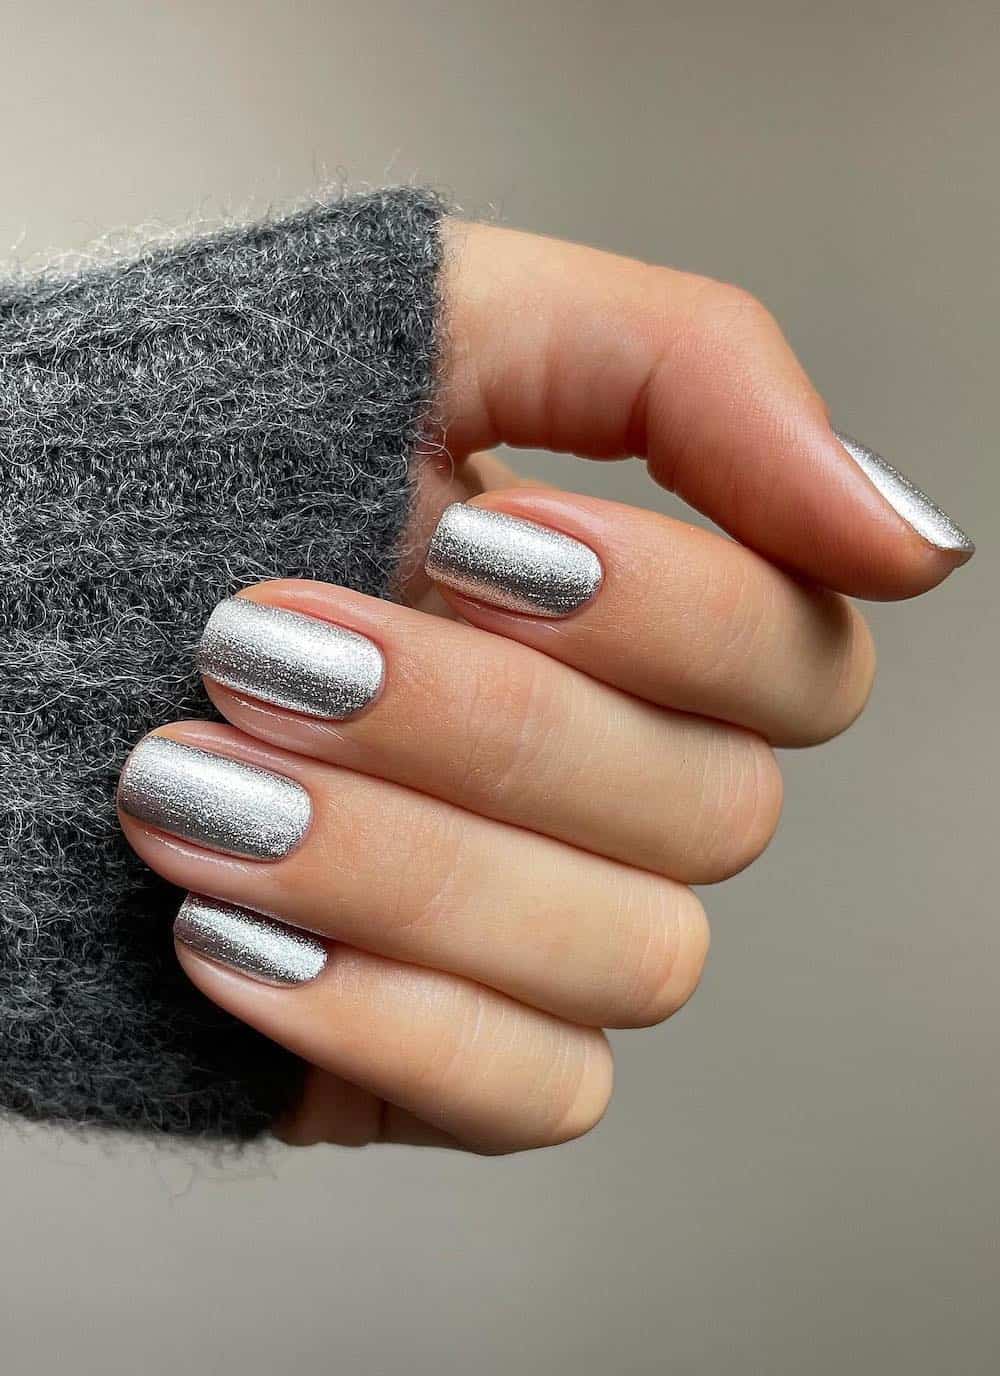 A hand with short square nails painted a metallic silver shade